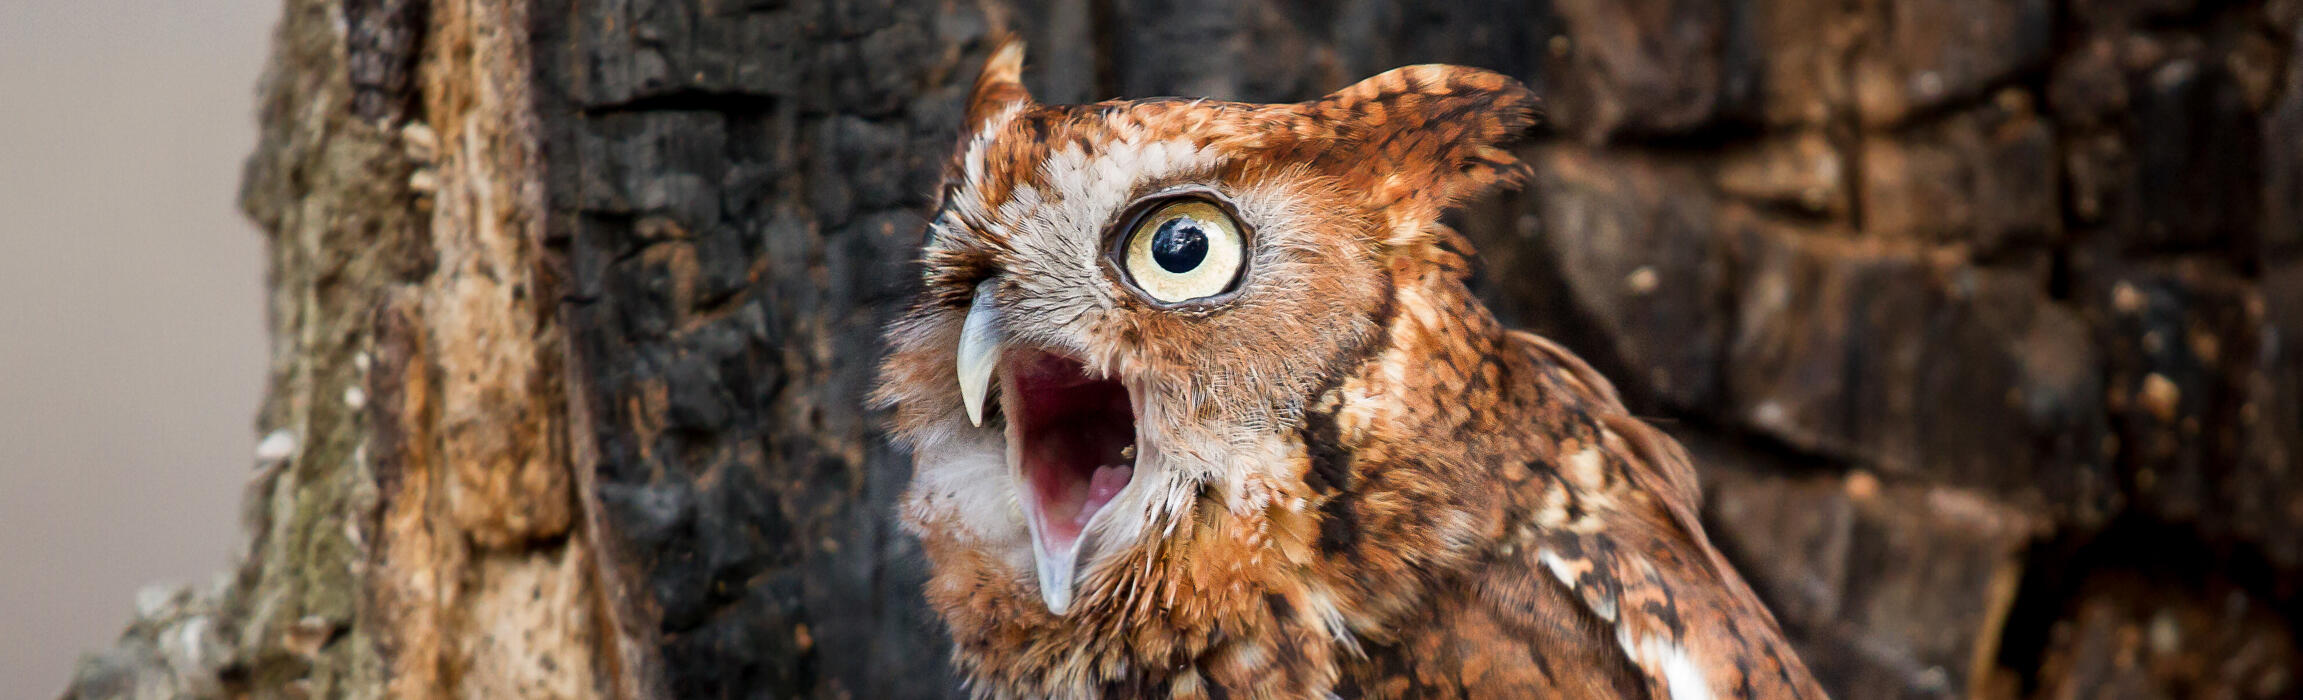 A Screech Owl faces the left and has its mouth open, making a loud call. Screech Owls don't actually screech, they make a sound more similar to a low horse whinny. Whoever named them that should be perhaps tarred and feathered.